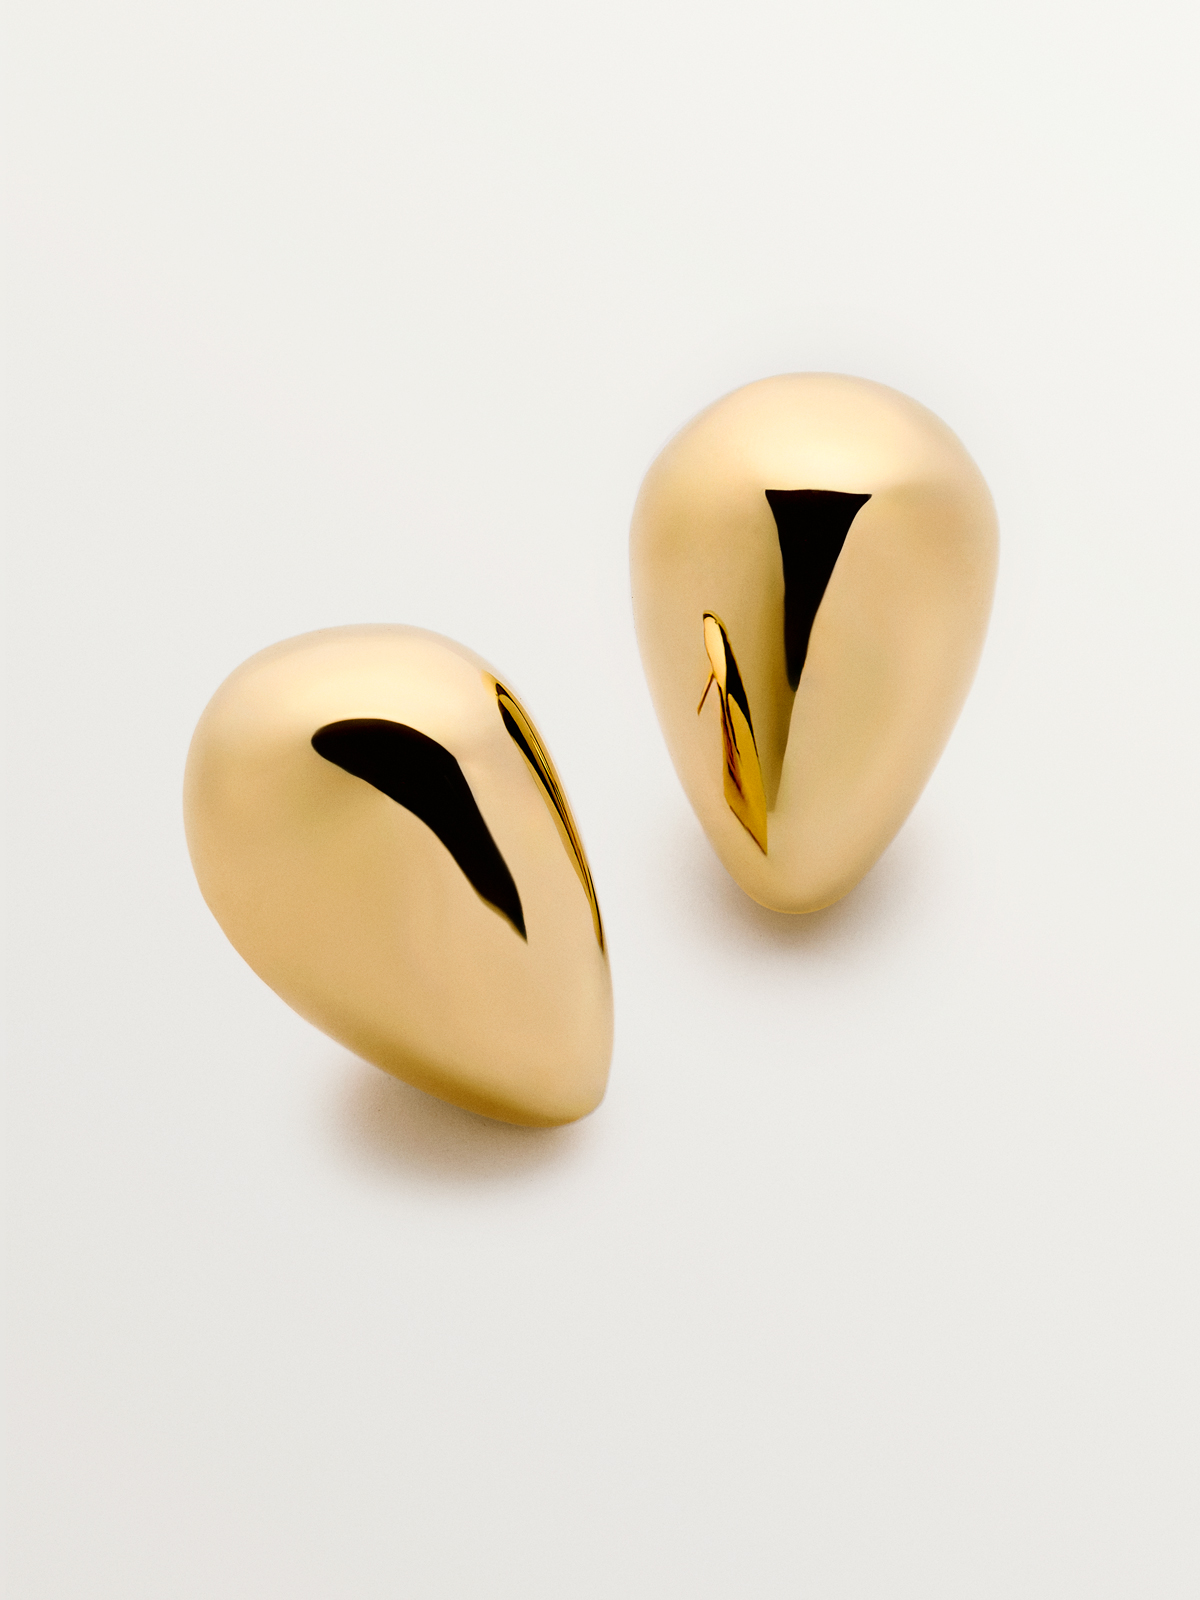 Medium drop earrings in 18K yellow gold plated 925 silver with polished effect